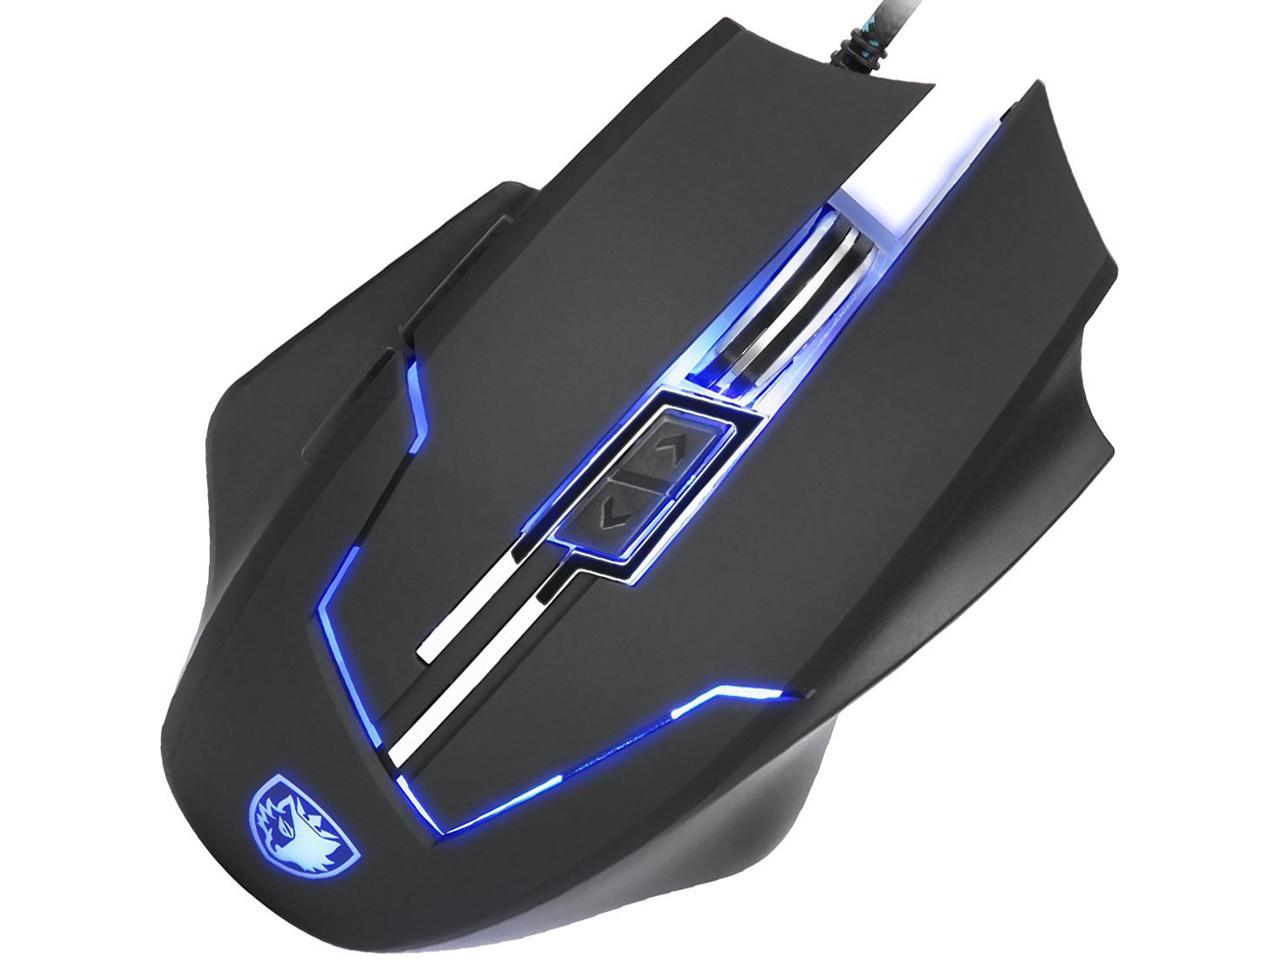 SADES Q7 Gaming Mice 6 Buttons Professional LED Optical USB Wired ...